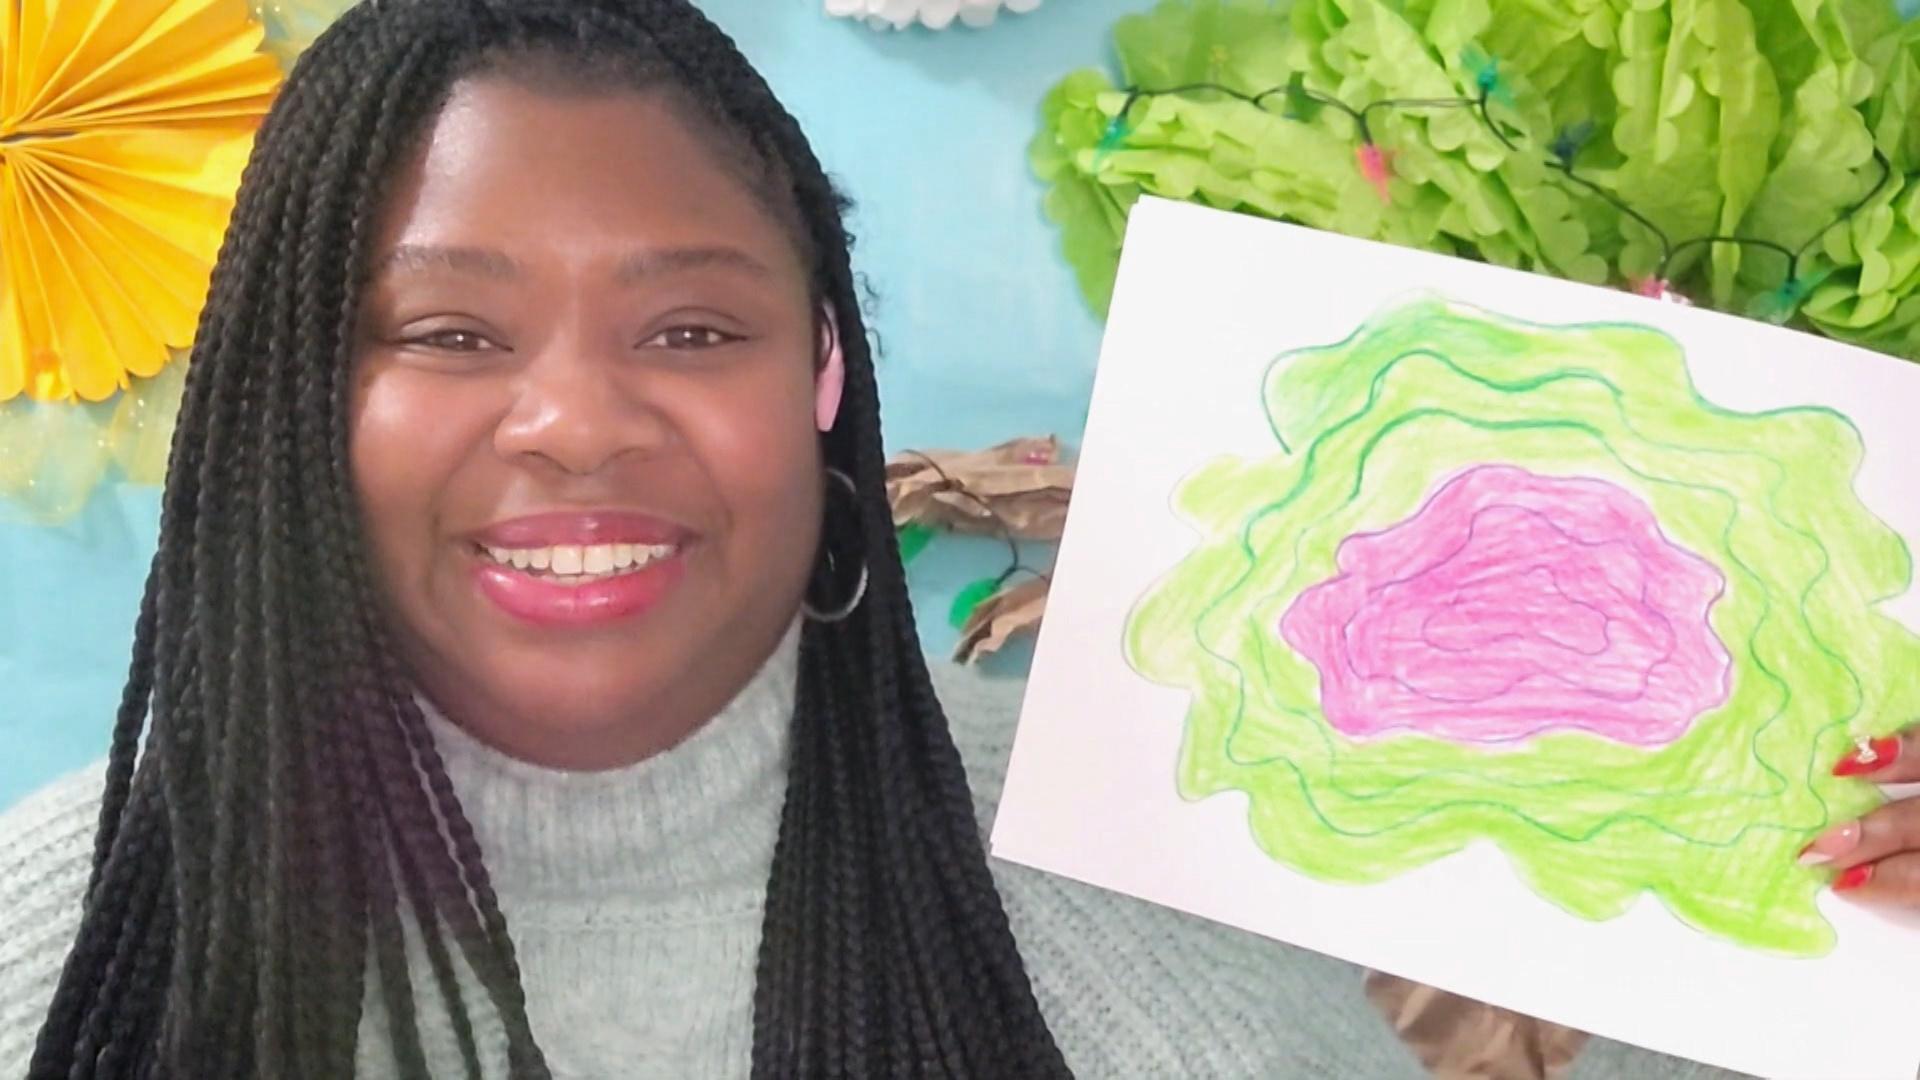 A Black woman in a grey sweater holds up a drawing with green and pink squiggles.